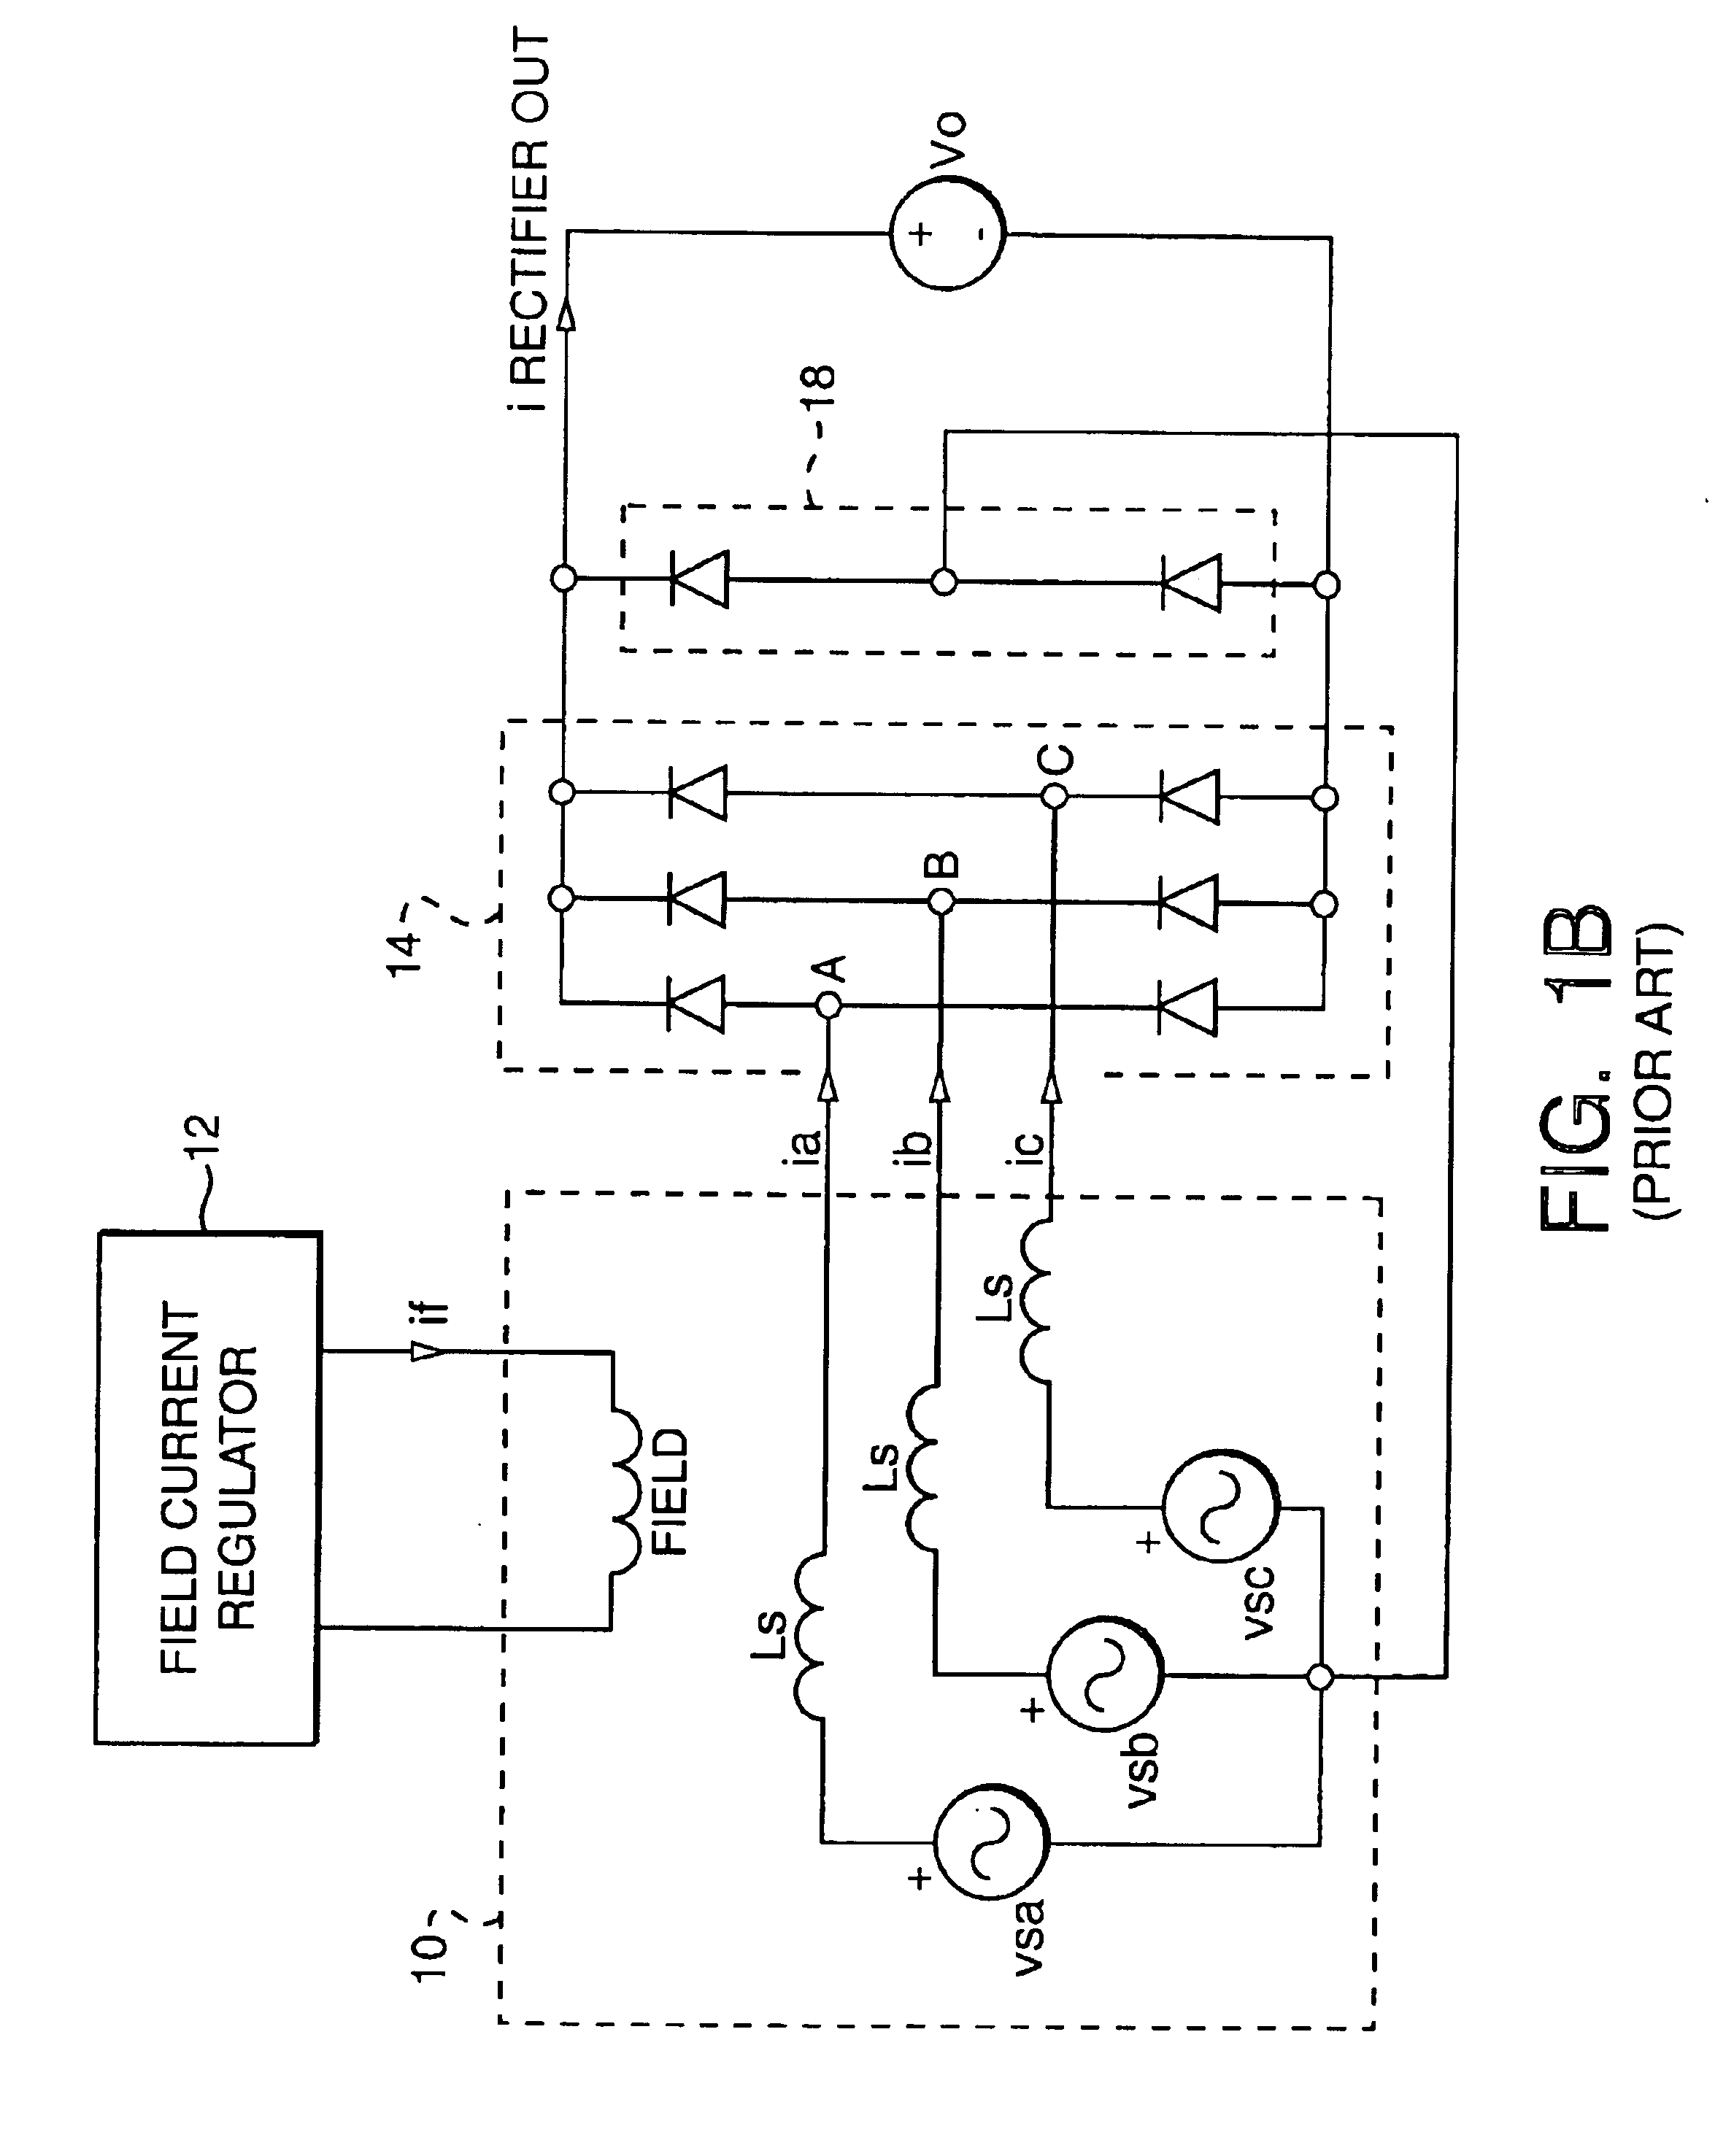 Alternator control circuit and related techniques